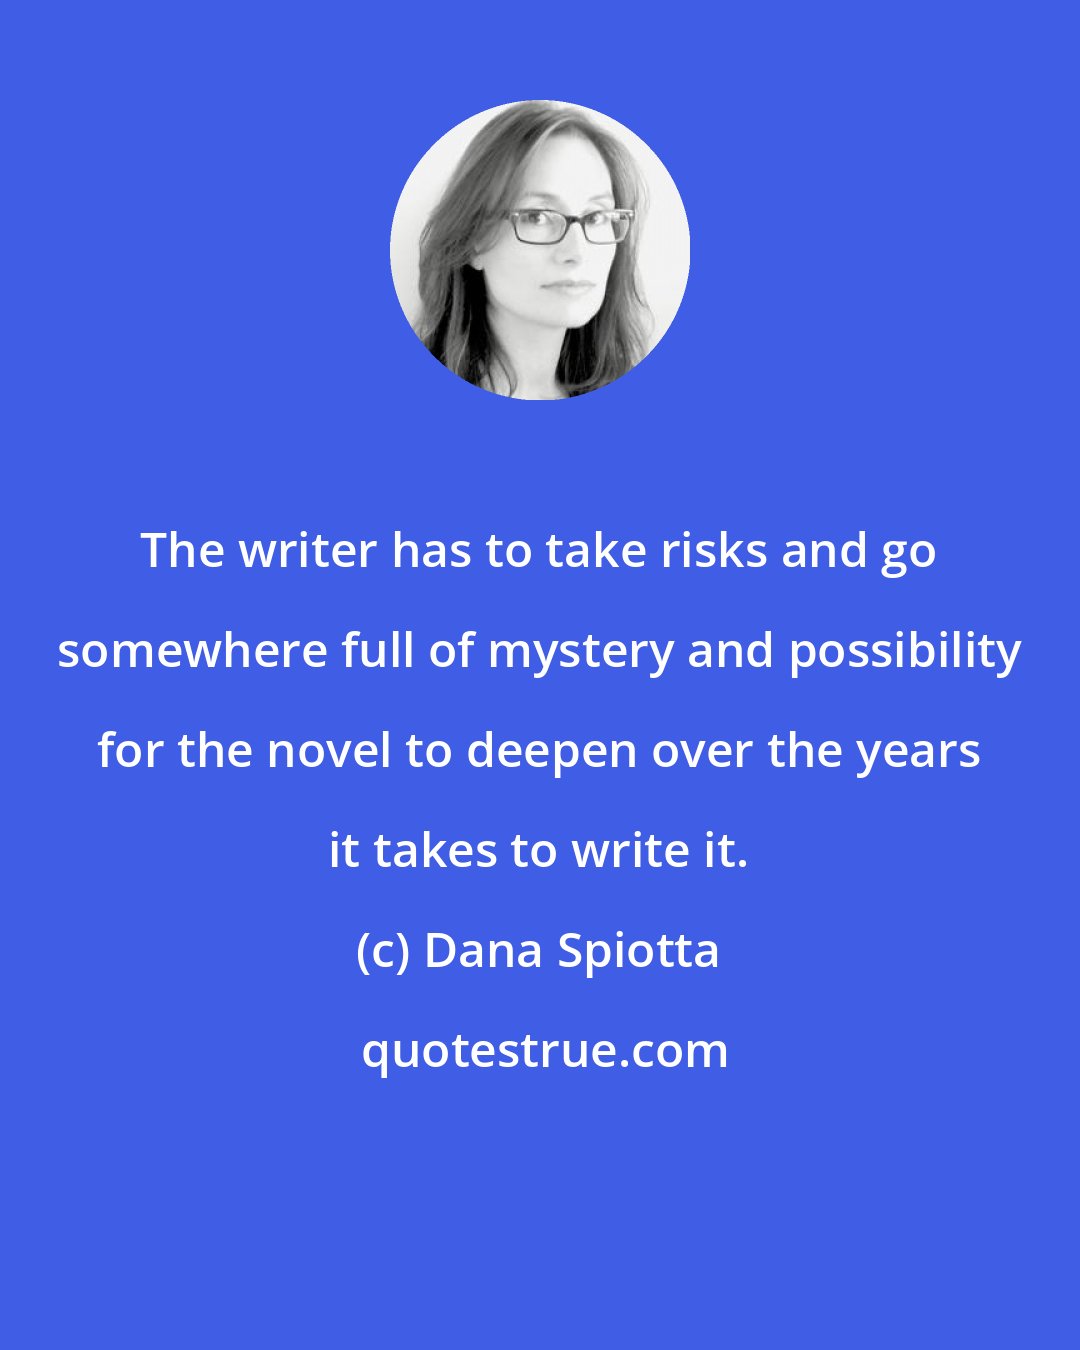 Dana Spiotta: The writer has to take risks and go somewhere full of mystery and possibility for the novel to deepen over the years it takes to write it.